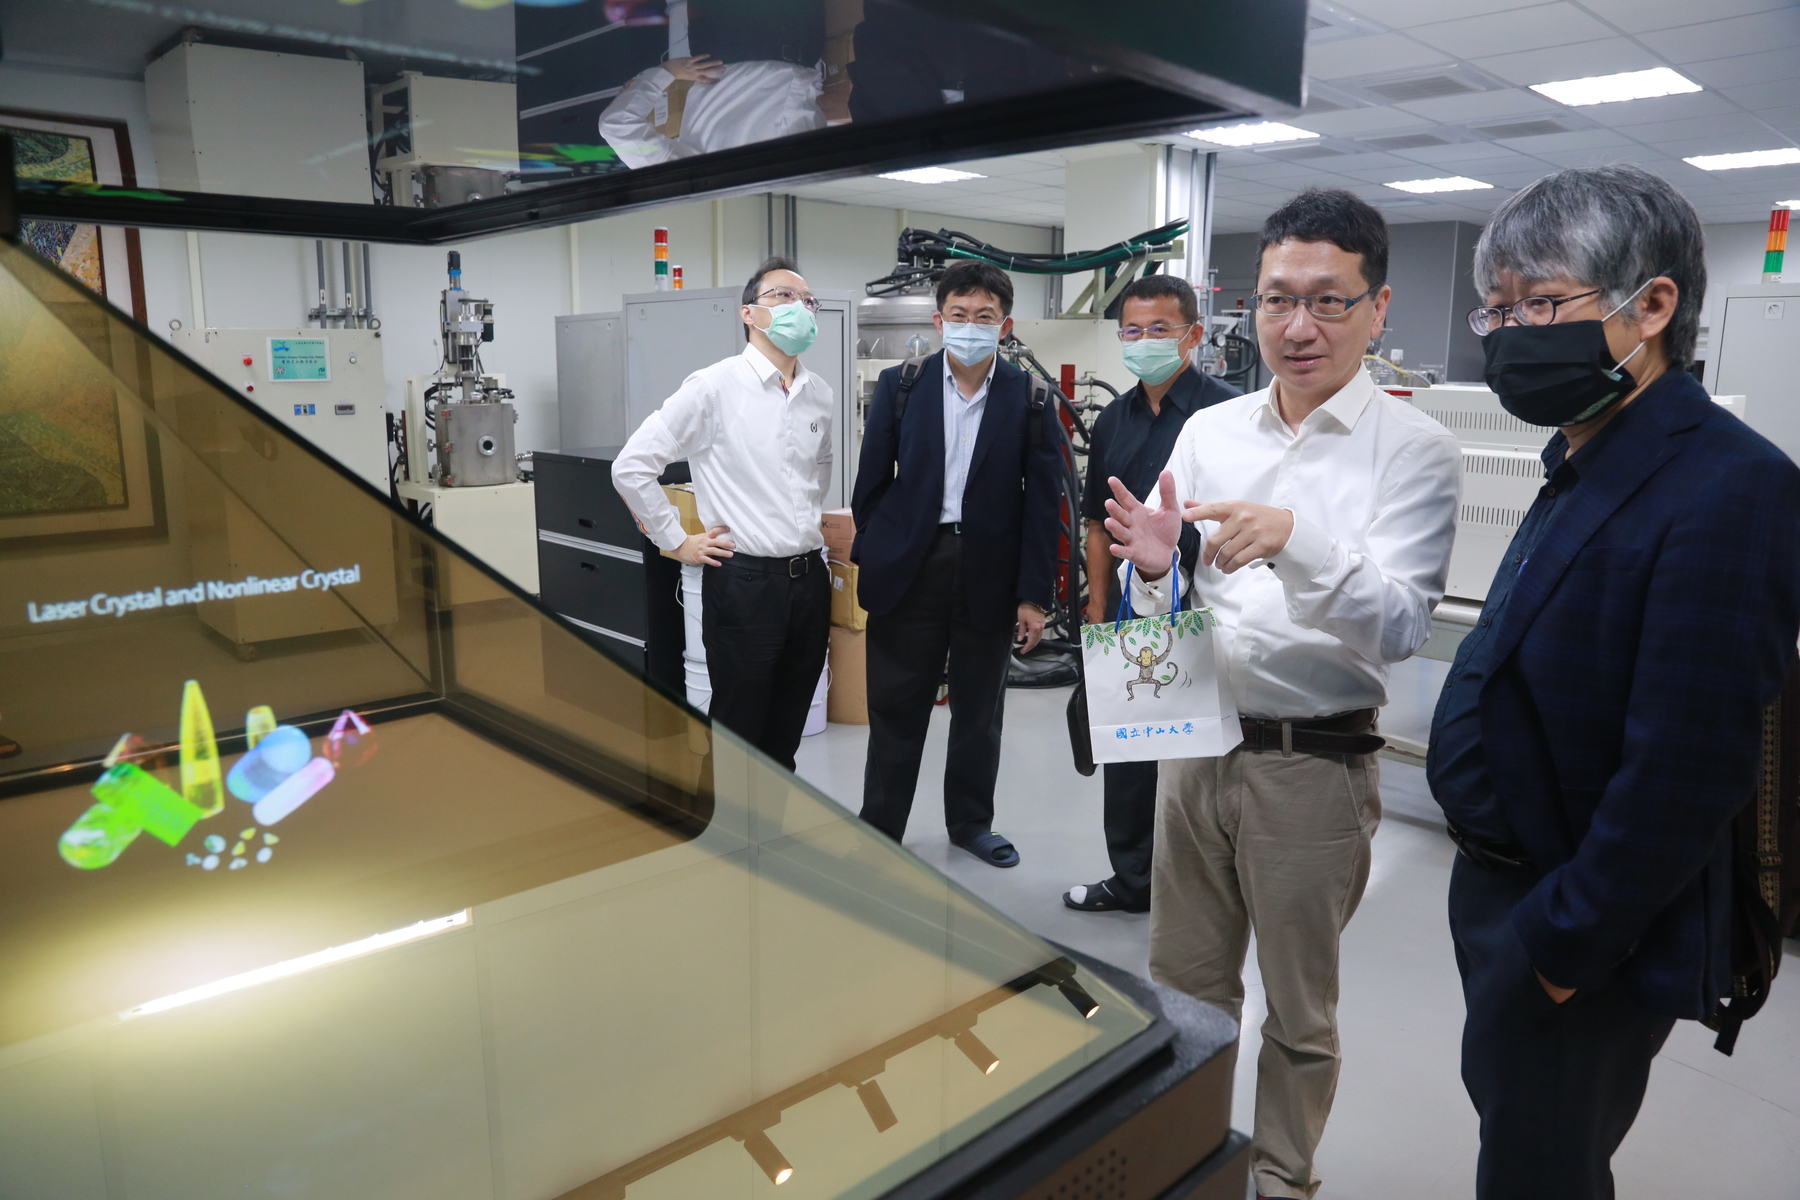 The Center of Crystal Research at NSYSU is the first among universities in Taiwan to develop equipment and technologies for growing a third-generation semiconductor material – silicon carbide crystals. The Political Deputy Minister of the Ministry of Science and Technology, Dr. Minn-Tsong Lin (first on the right), visited the Center last month. Second from the right is the Director of the Center of Crystal Research, Professor Mitch Chou. /Photo courtesy of NSYSU